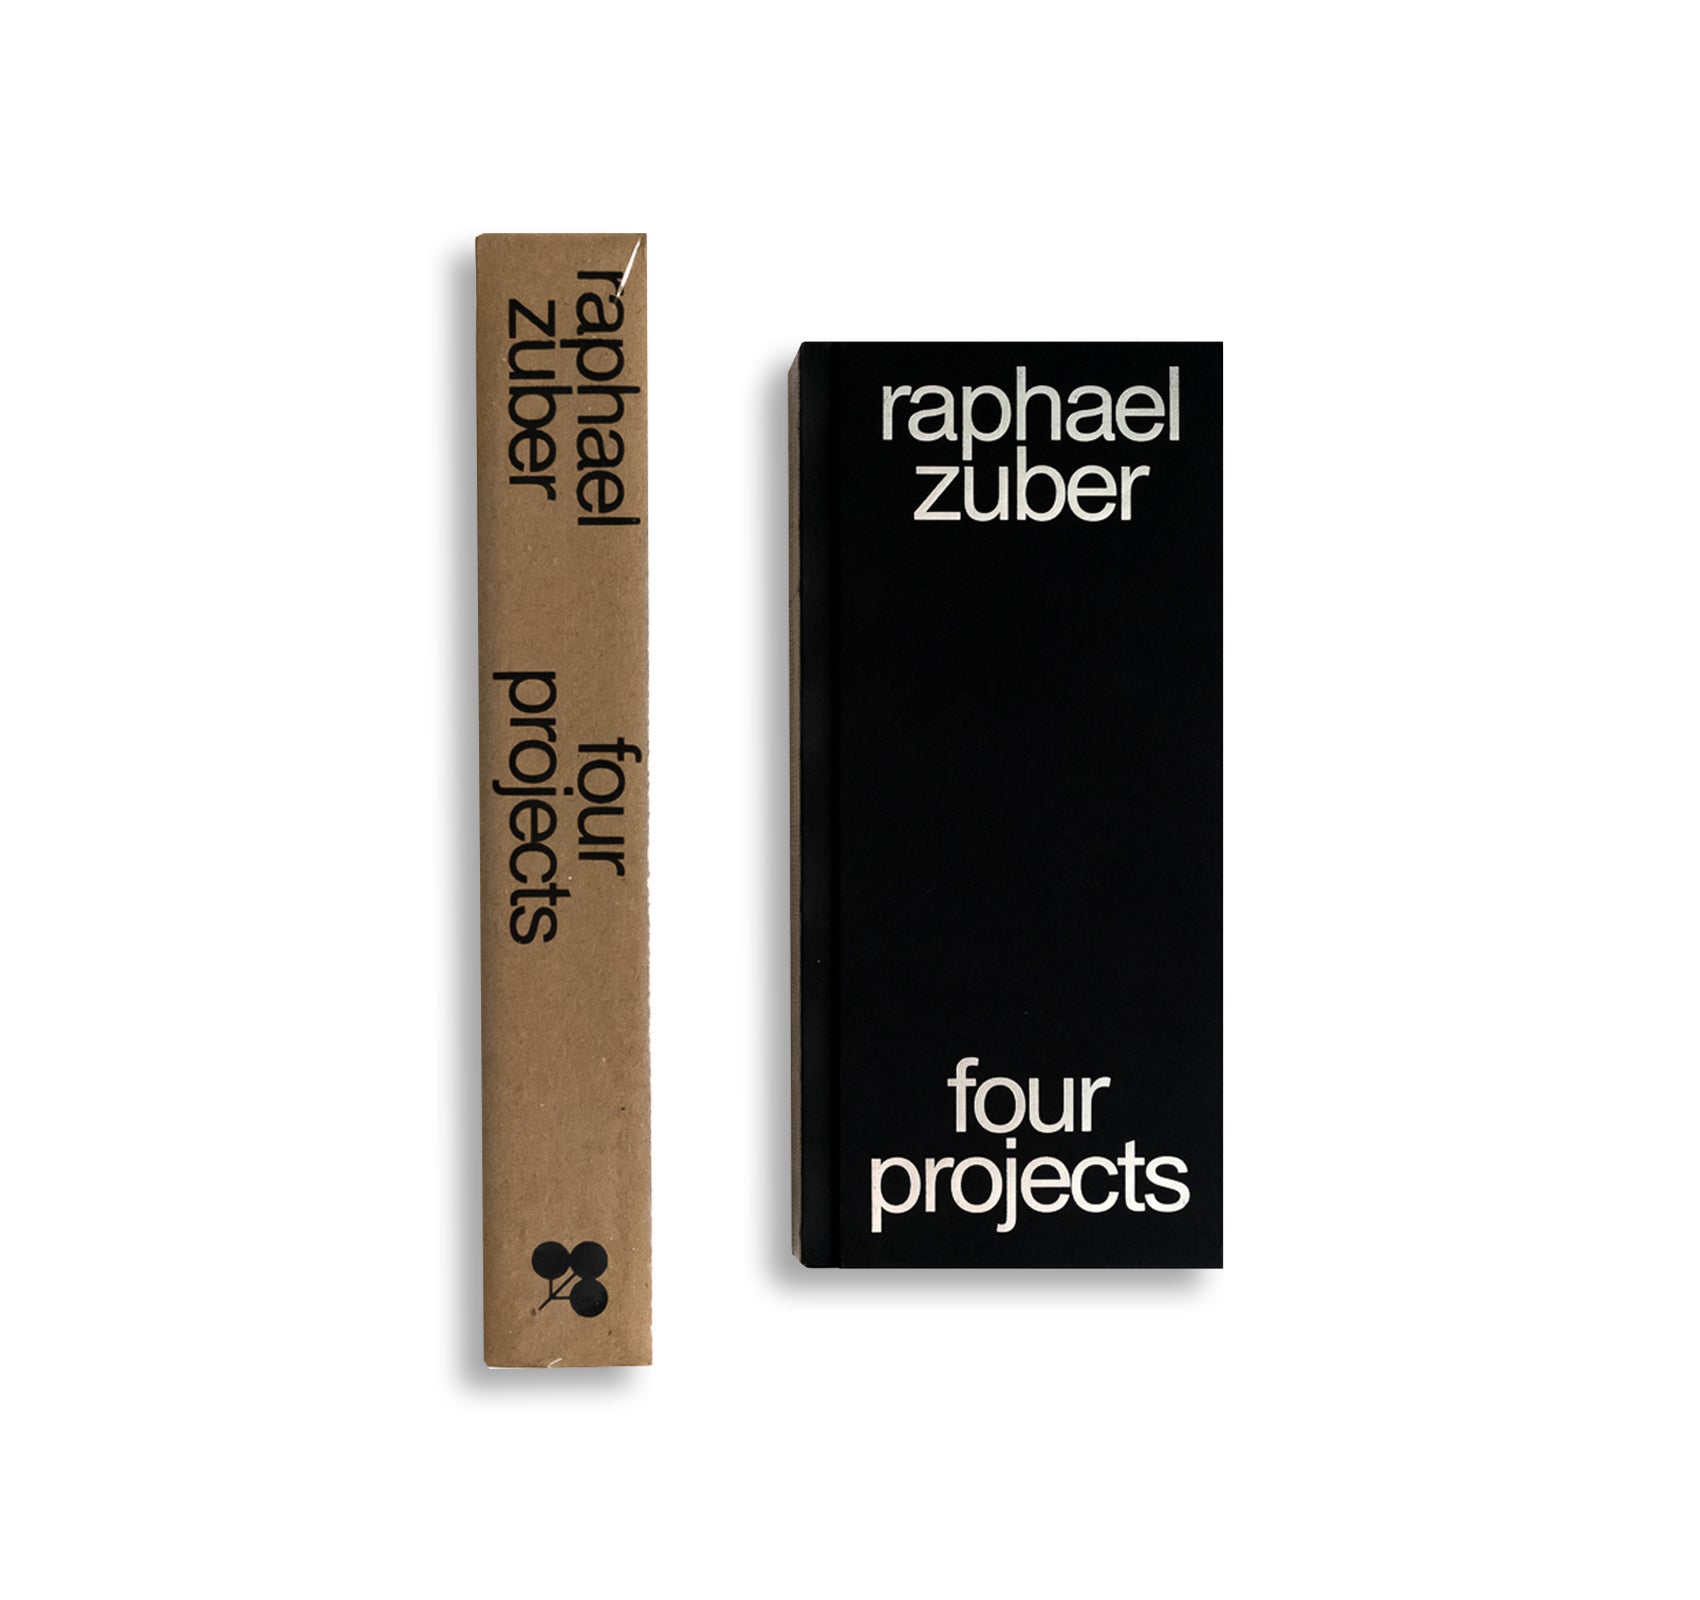 FOUR PROJECTS by Raphael Zuber